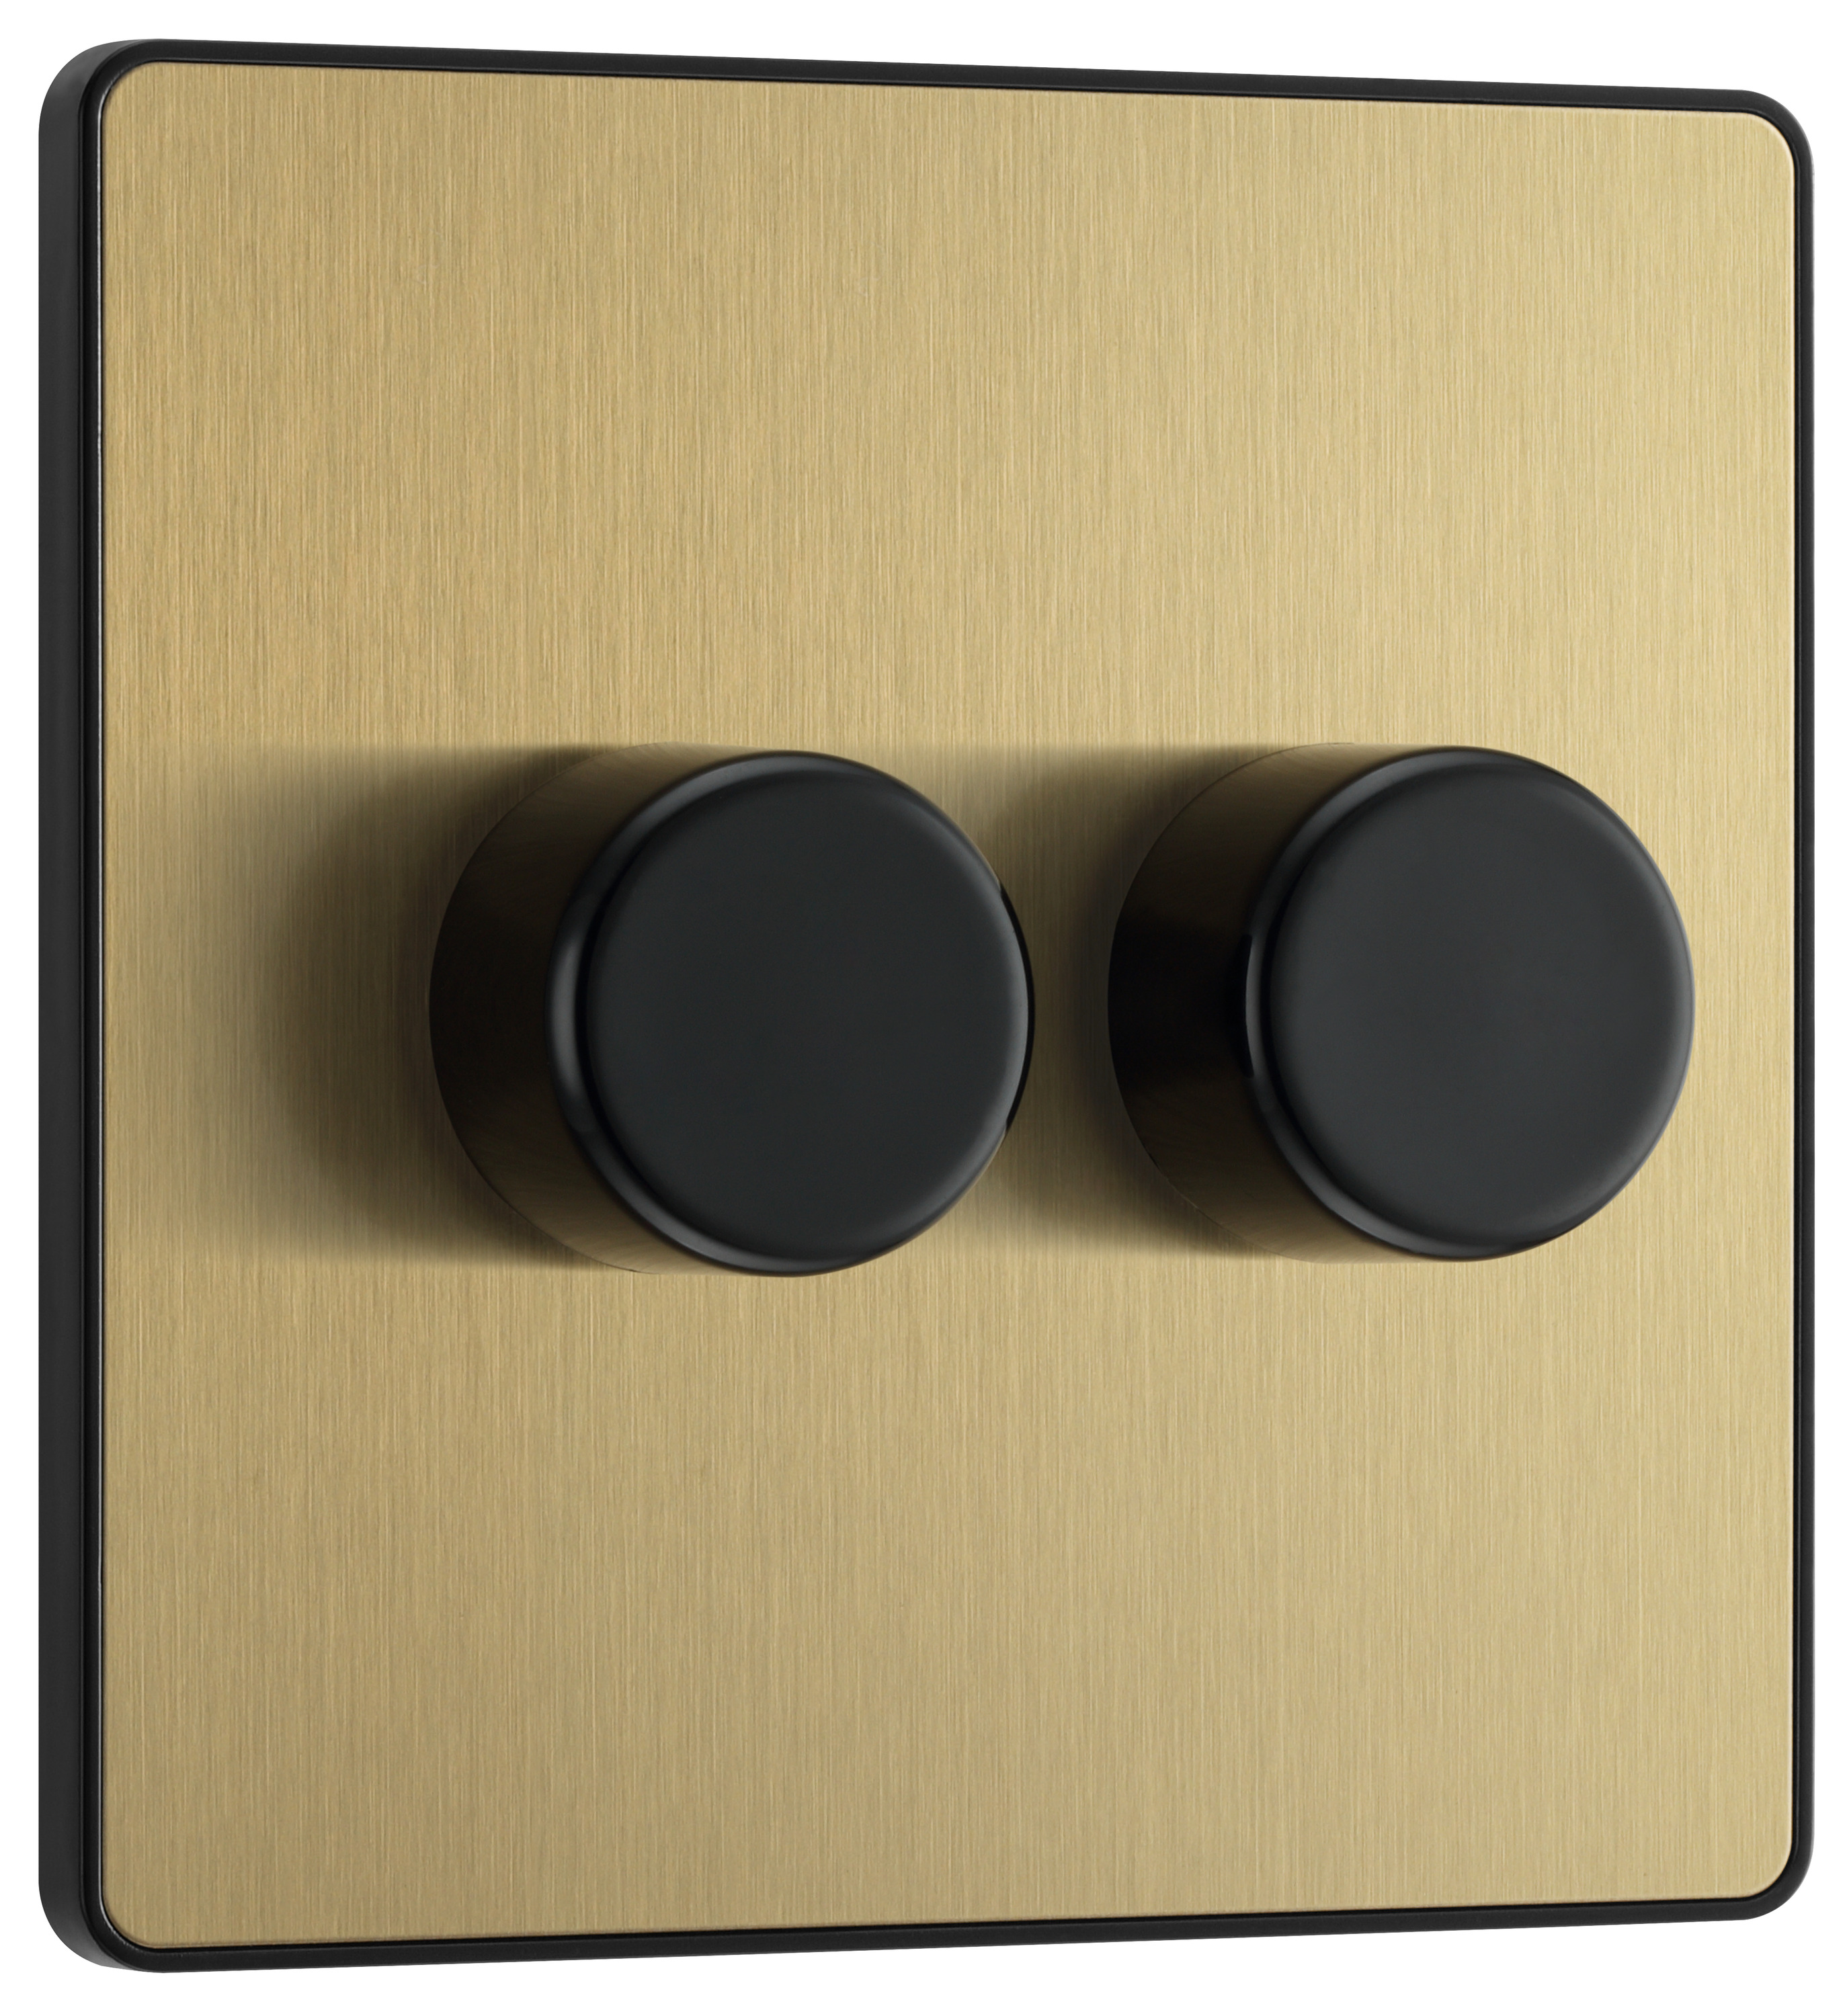 BG Evolve Brushed Brass Trailing Edge Led Double Push On / Off 2-Way Dimmer Switch - 200W